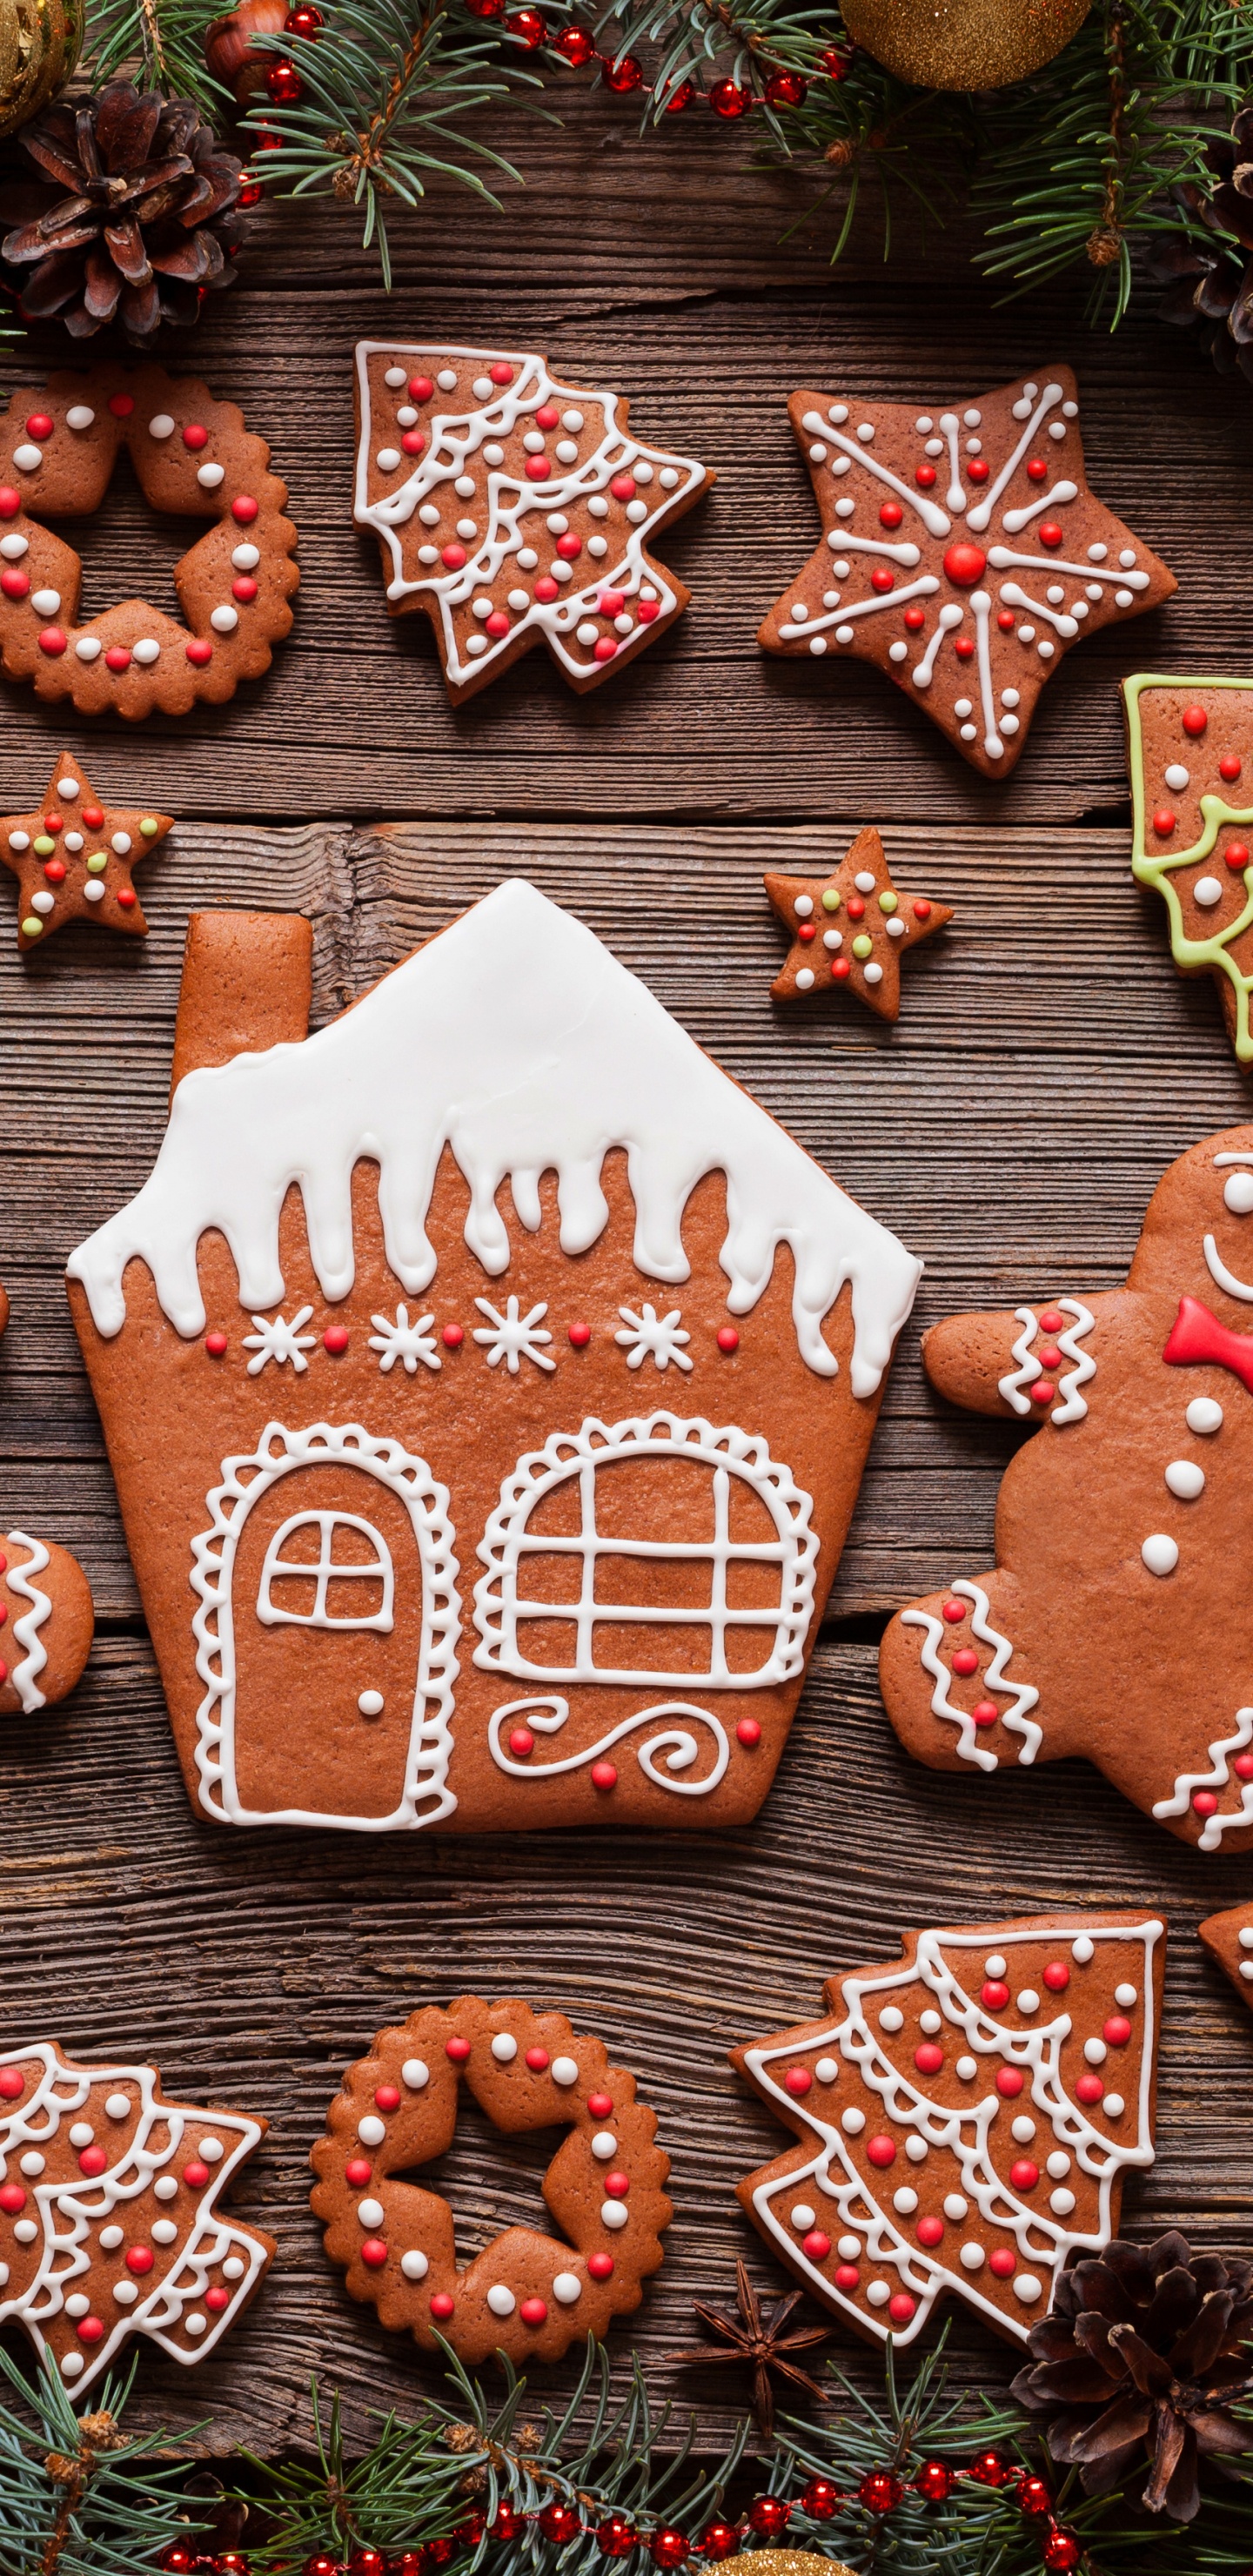 Gingerbread House, Christmas Day, Gingerbread Man, New Year, Christmas Tree. Wallpaper in 1440x2960 Resolution